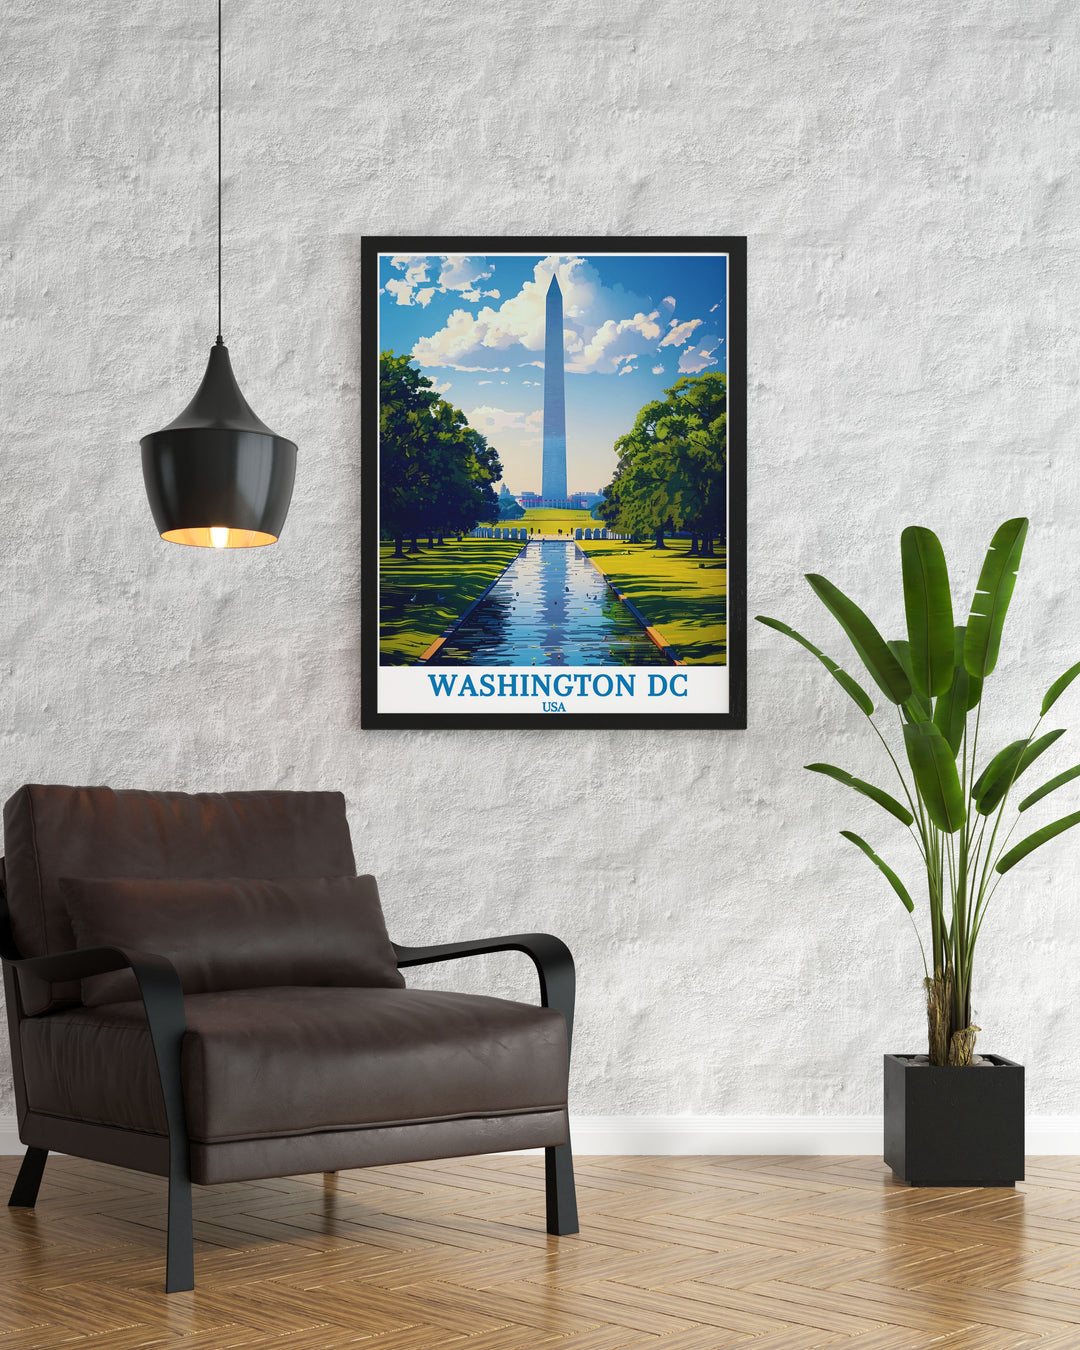 Versatile Washington DC decor piece highlighting the Washington Monument a perfect addition to any art collection or as a standalone statement piece